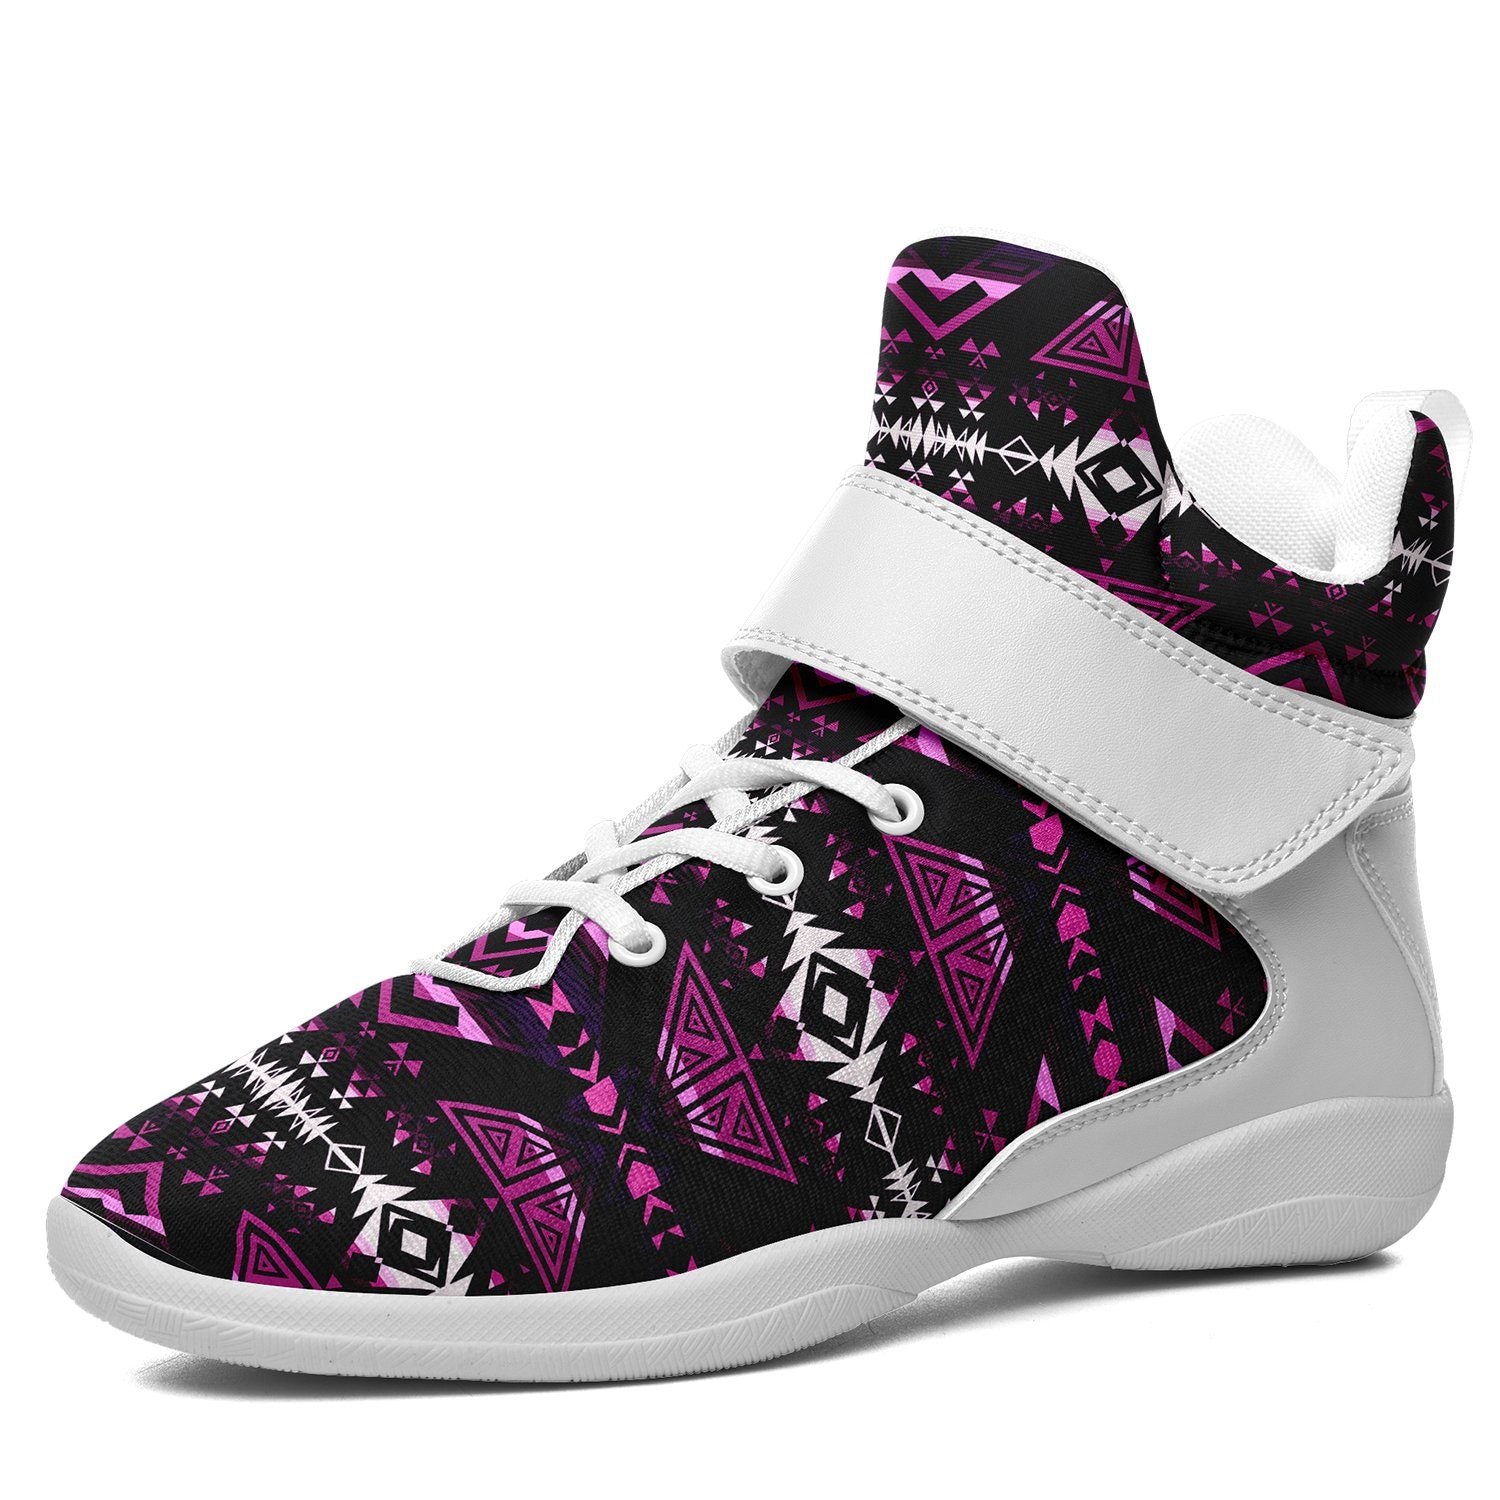 Upstream Expedition Moonlight Shadows Ipottaa Basketball / Sport High Top Shoes 49 Dzine US Women 4.5 / US Youth 3.5 / EUR 35 White Sole with White Strap 